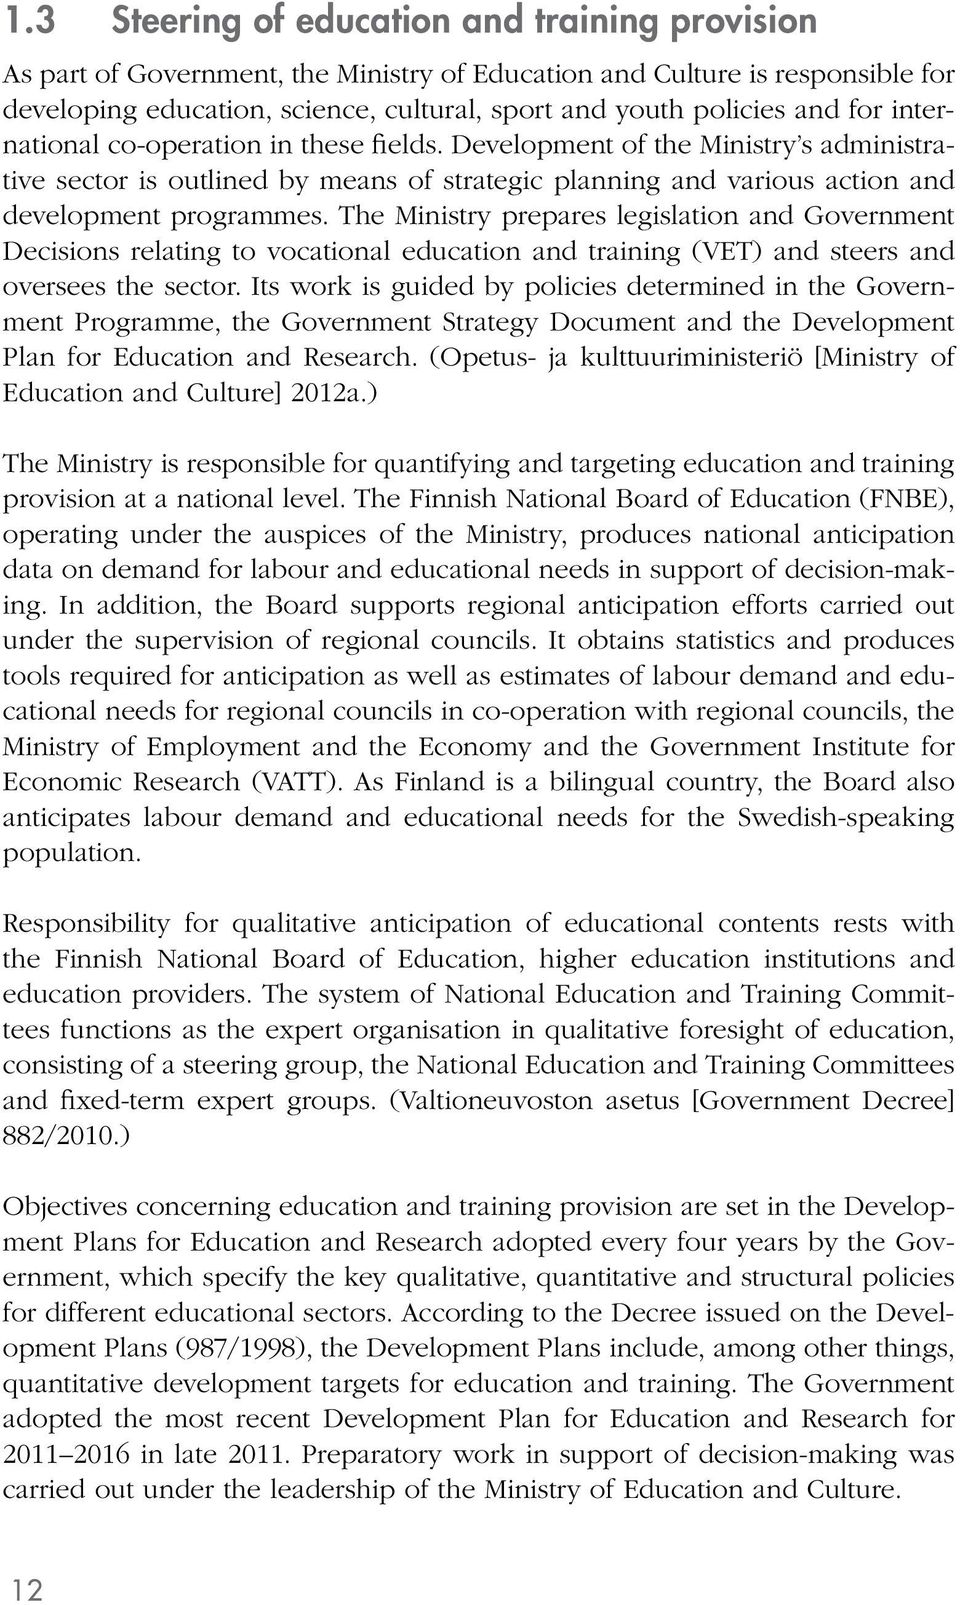 The Ministry prepares legislation and Government Decisions relating to vocational education and training (VET) and steers and oversees the sector.